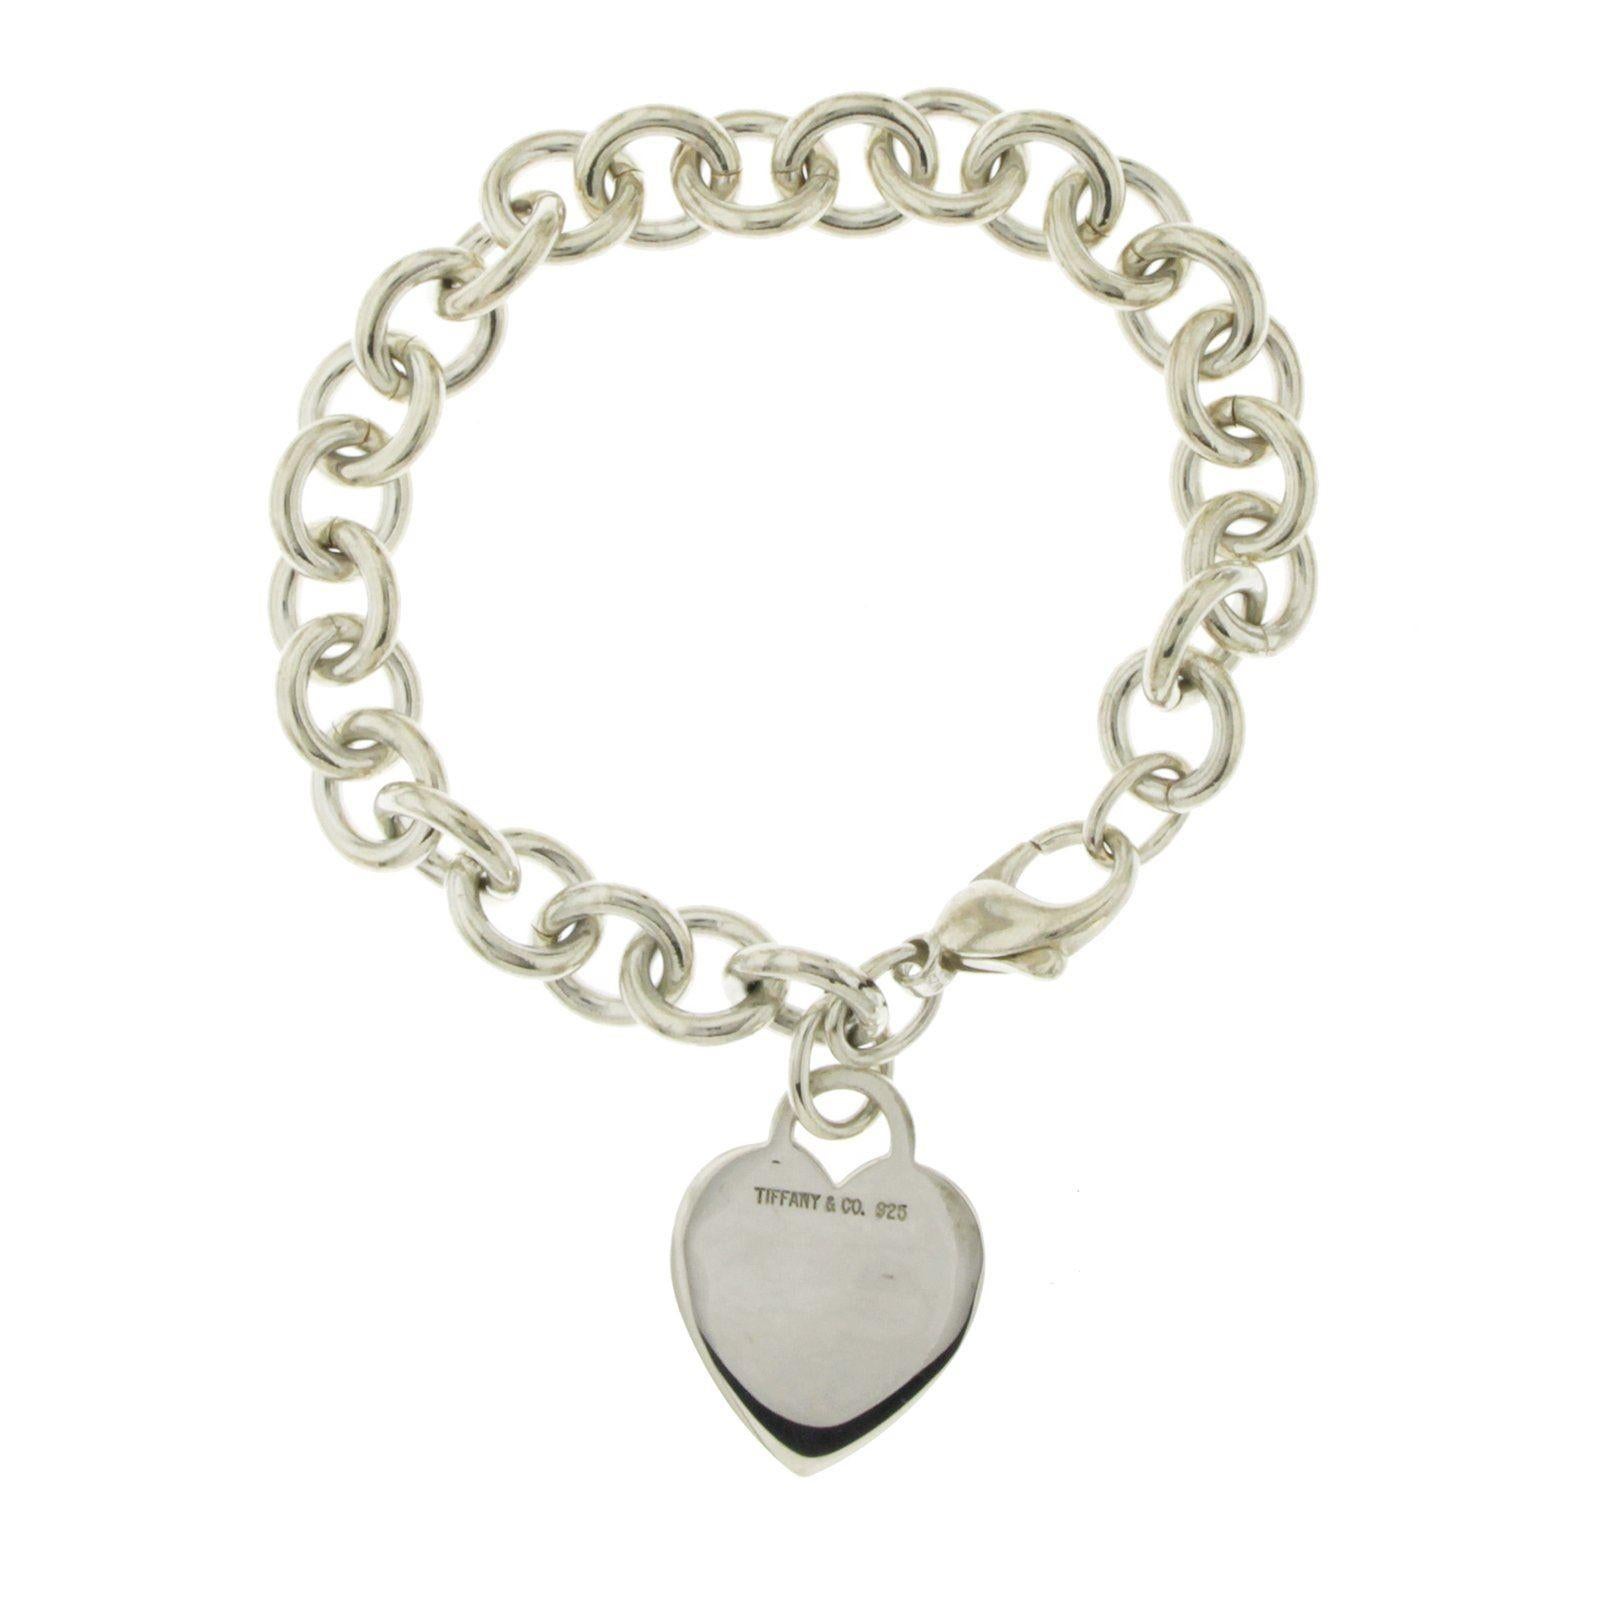 Women's or Men's Auth Tiffany & Co. 925 Sterling Silver Heart Tag Charm Bracelet